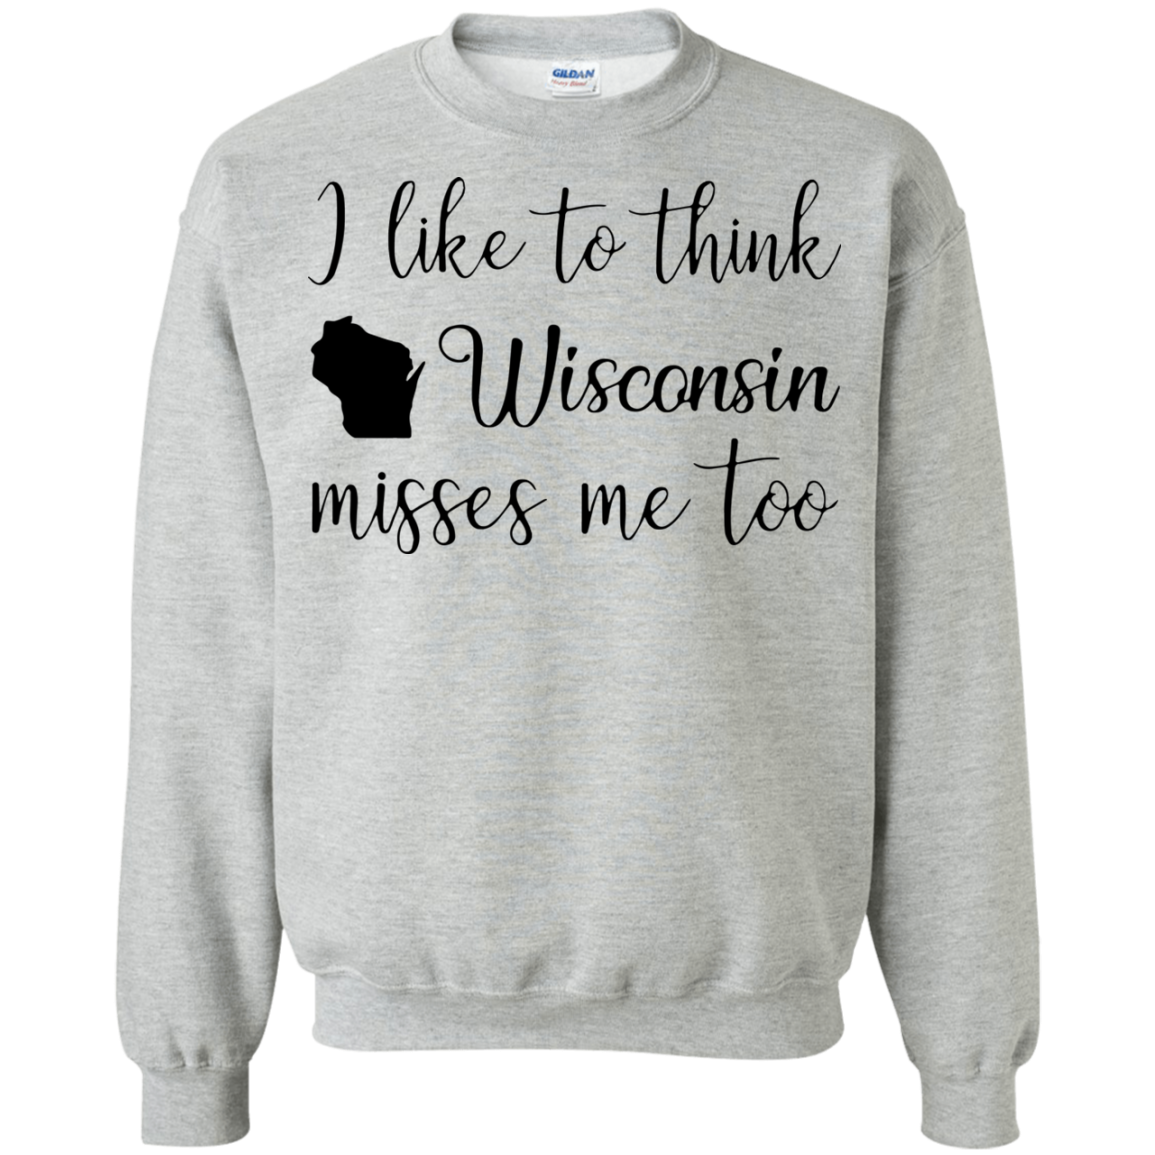 Shop From 1000 Unique I Like To Think Wisconsin Misses Me Too Shirt 